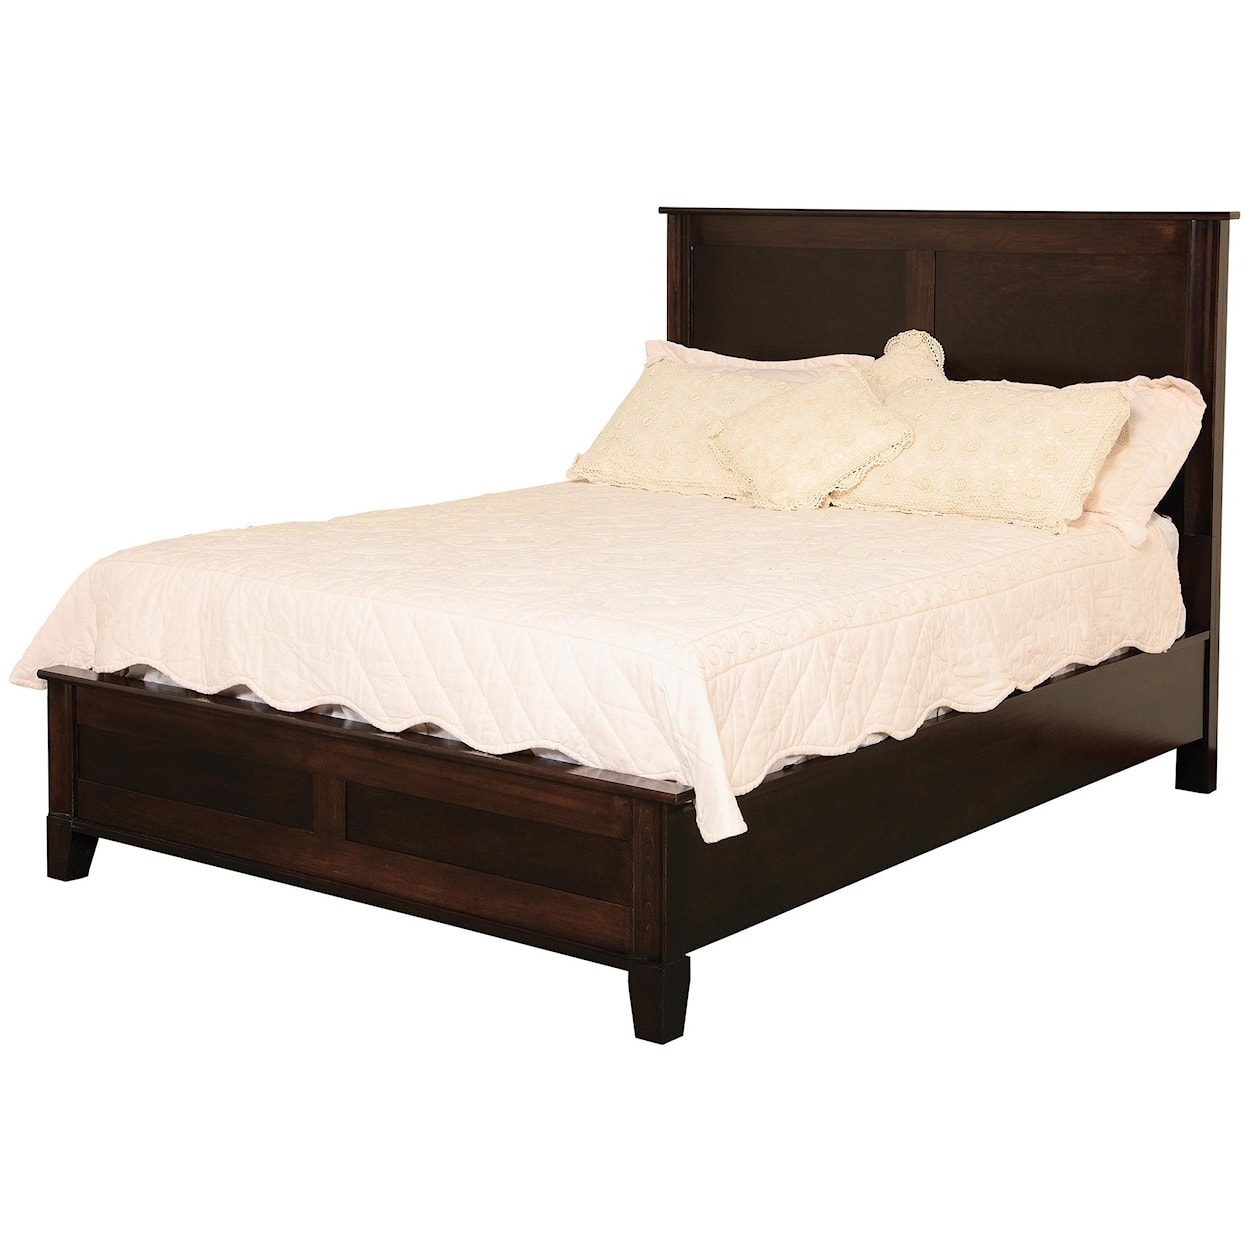 Daniel's Amish Cosmopolitan Frame Bed with Low Footboard